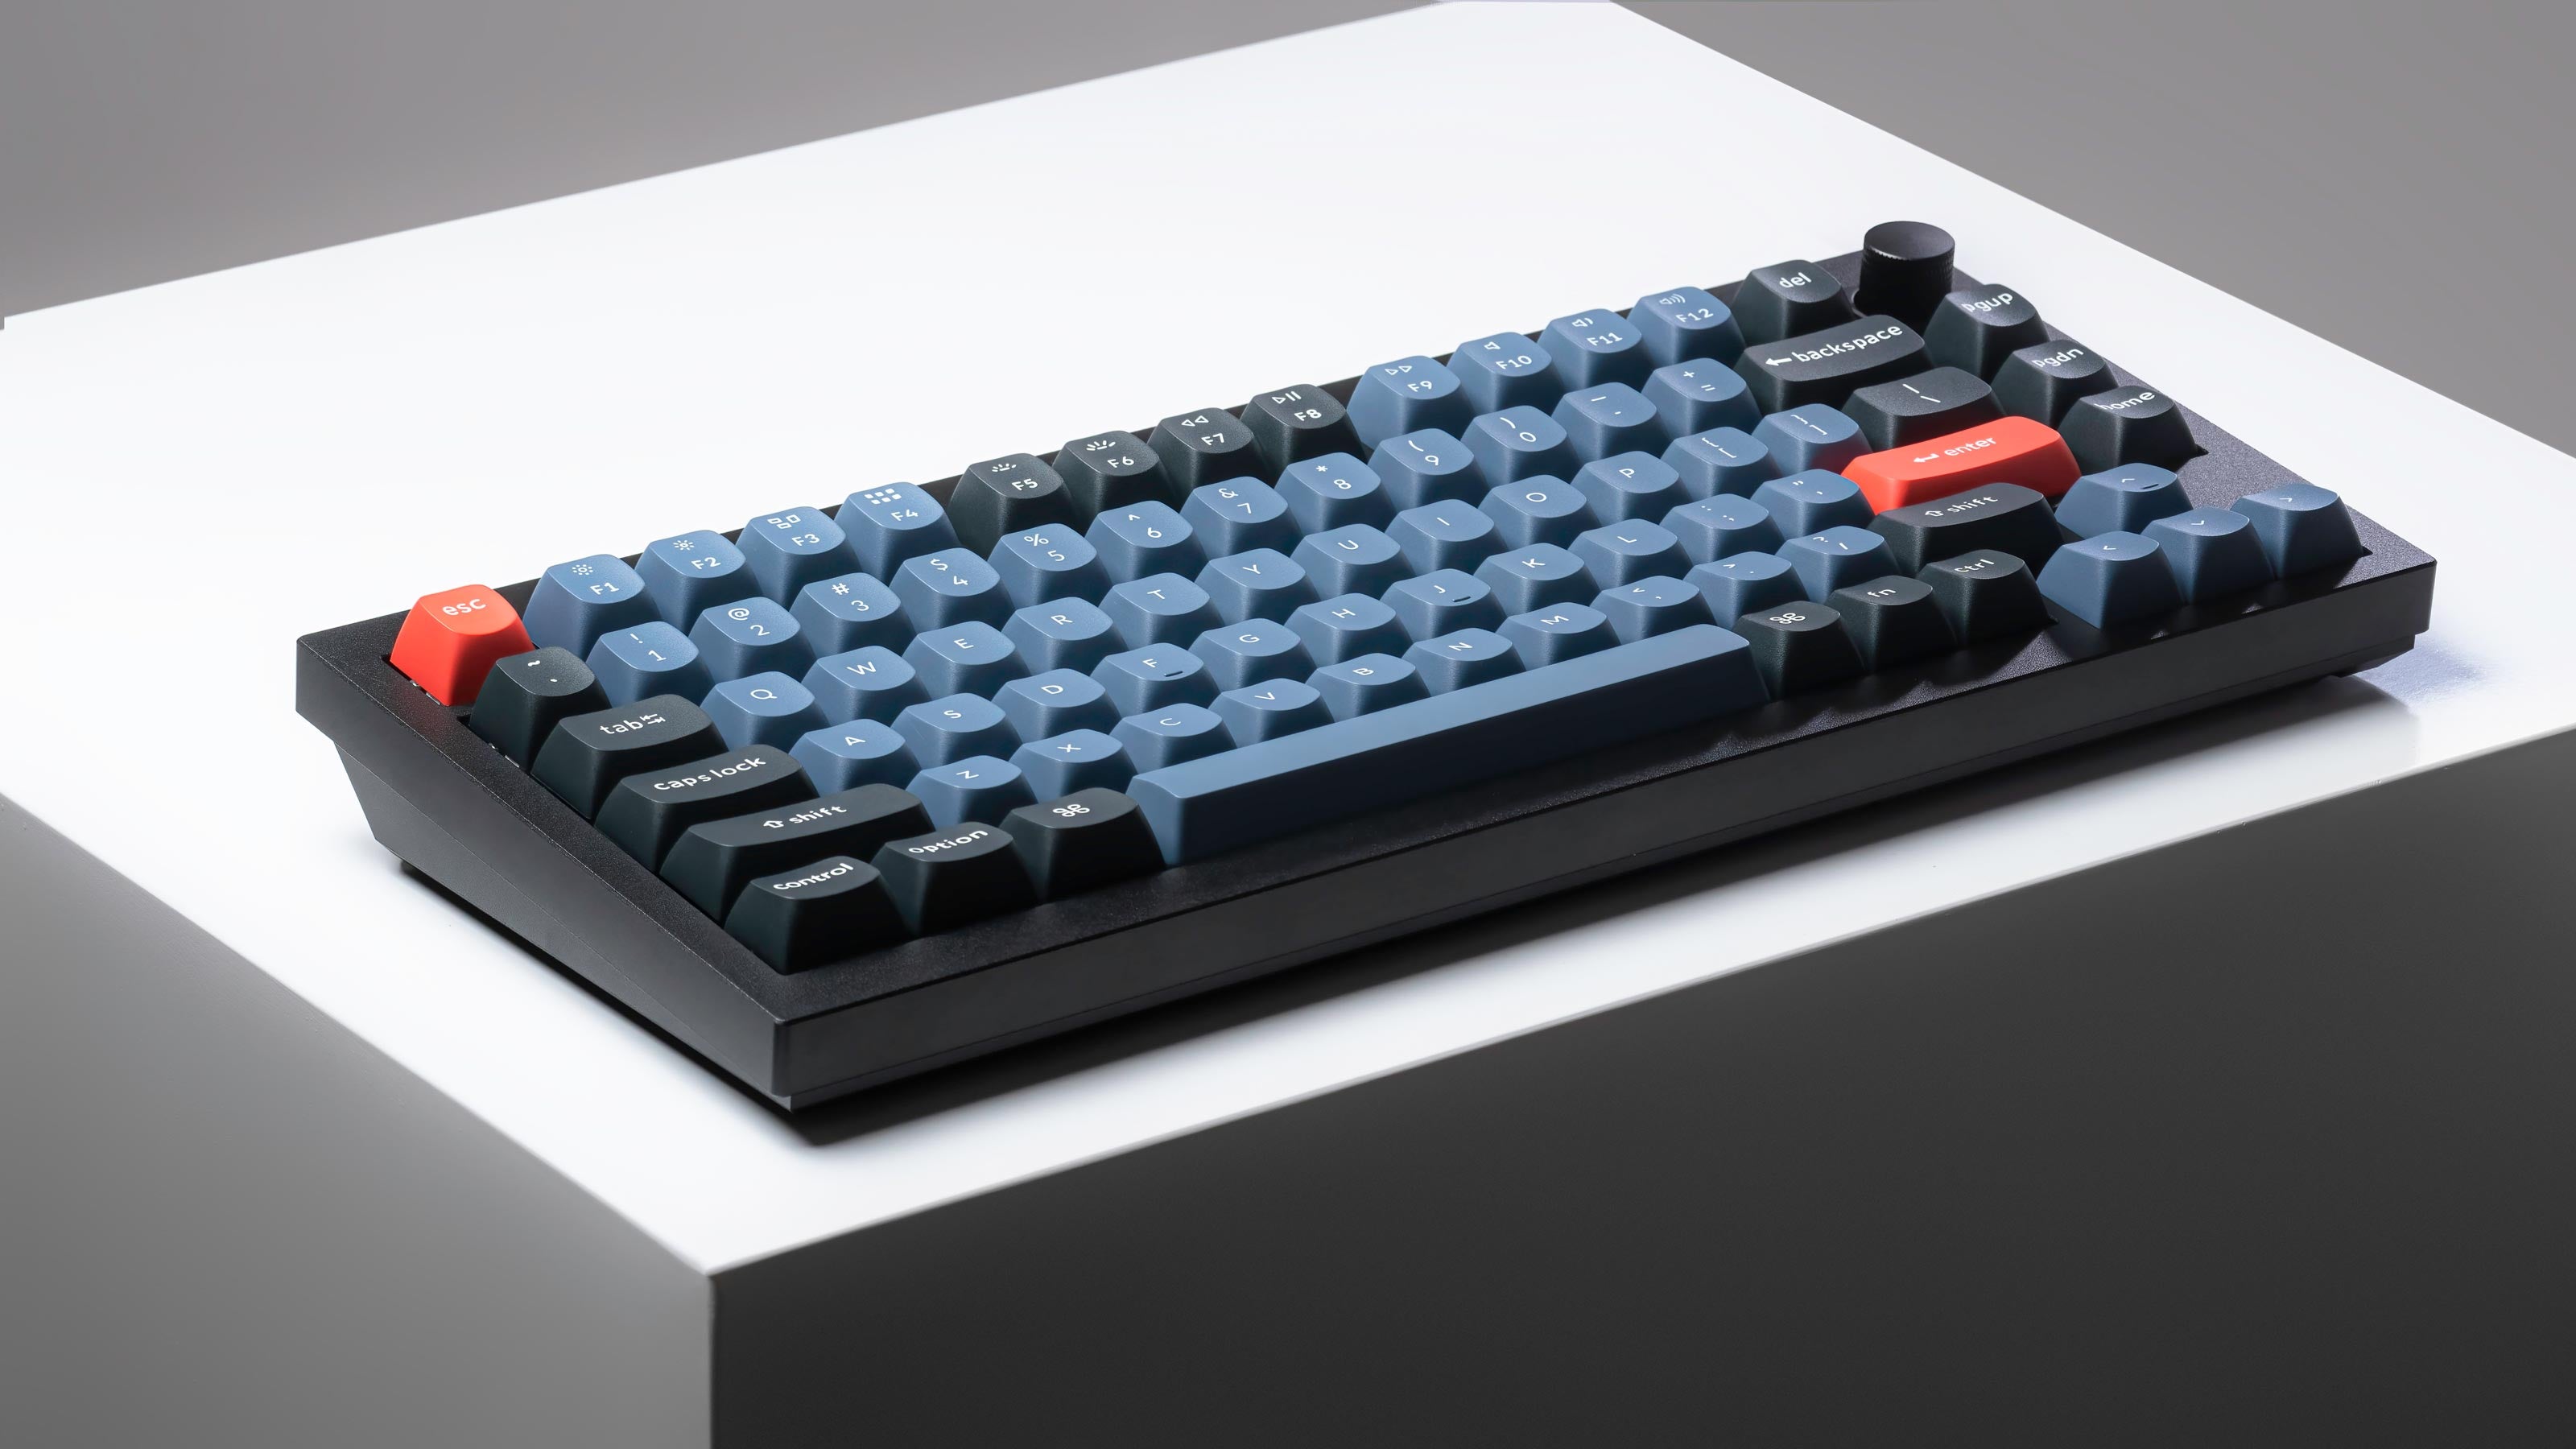 Keychron Q1 QMK VIA 75% layout custom mechanical keyboard with rotary encoder knob version with double-gasket design and screw-in PCB stabilizer and hot-swappable south-facing RGB also with Barebone US ANSI or ISO layout with black grey blue frame